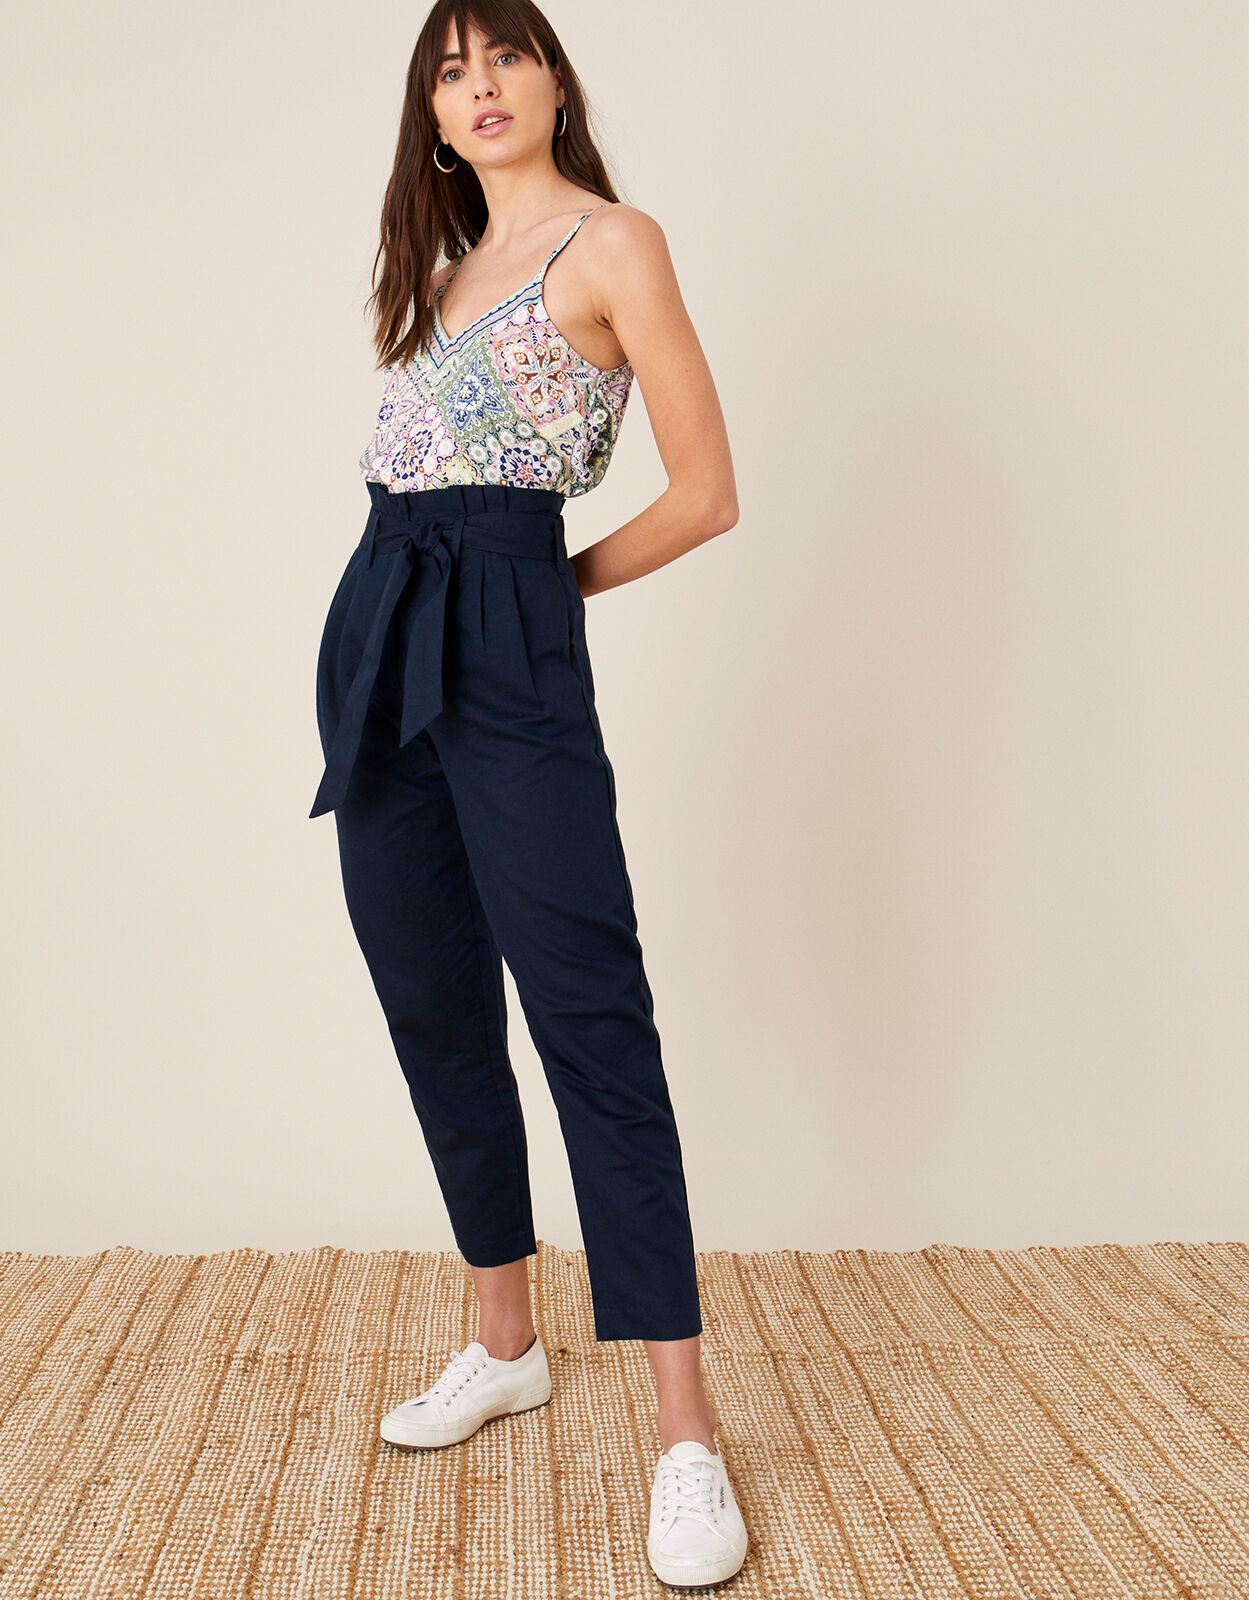 Ludgate Paperbag Trousers - Ecru | Boden UK | Chance clothes, Dress making,  Summer attire